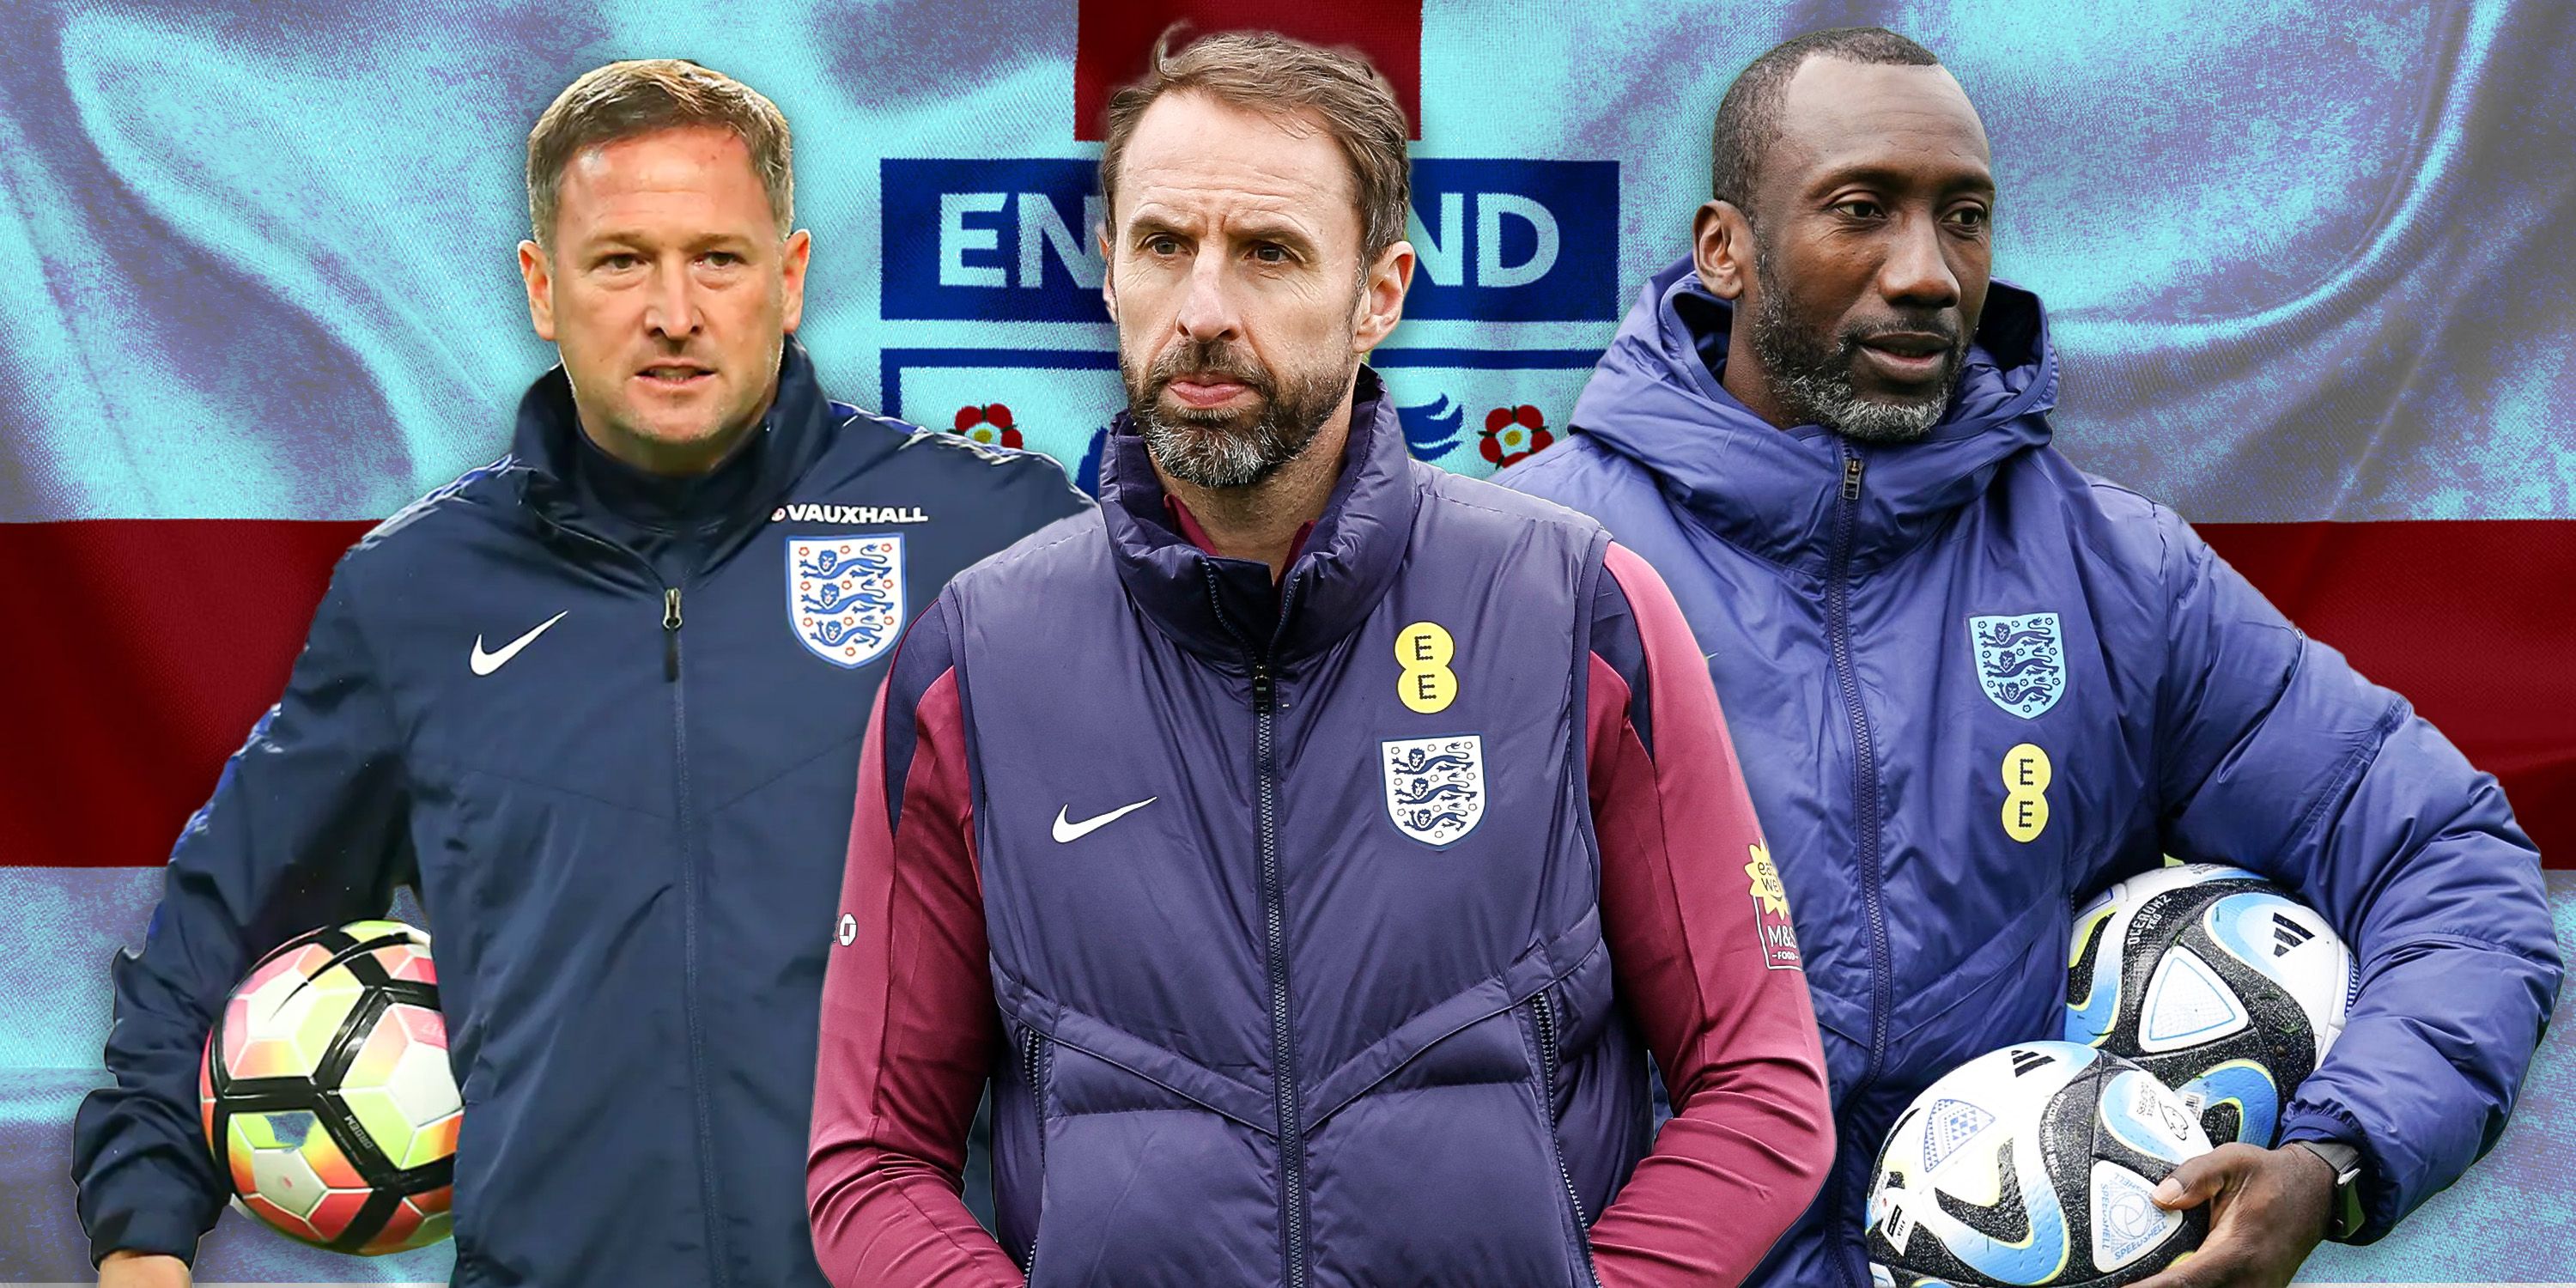 A custom image of England manager Gareth Southgate alongside his assistants Steve Holland and Jimmy Floyd Hasselbaink